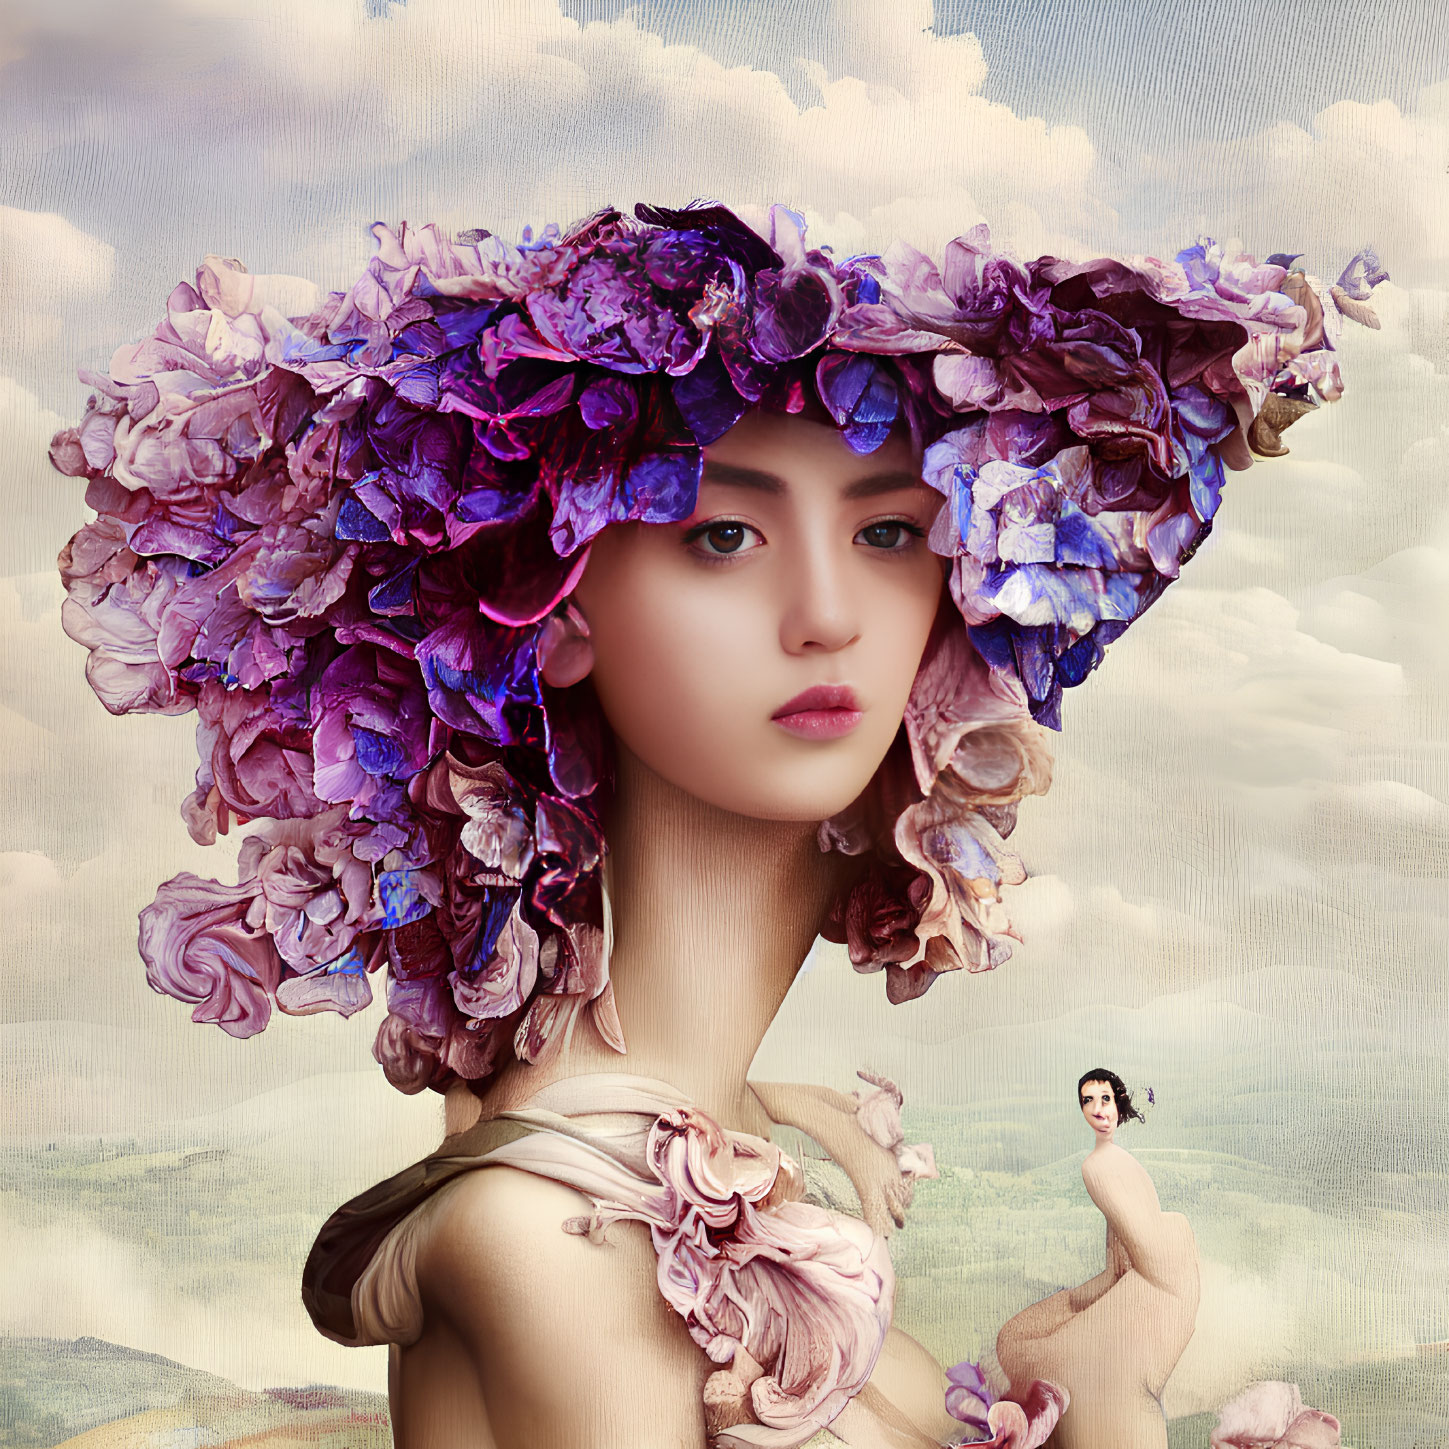 Person wearing large purple and blue flower headdress in front of classical landscape painting.